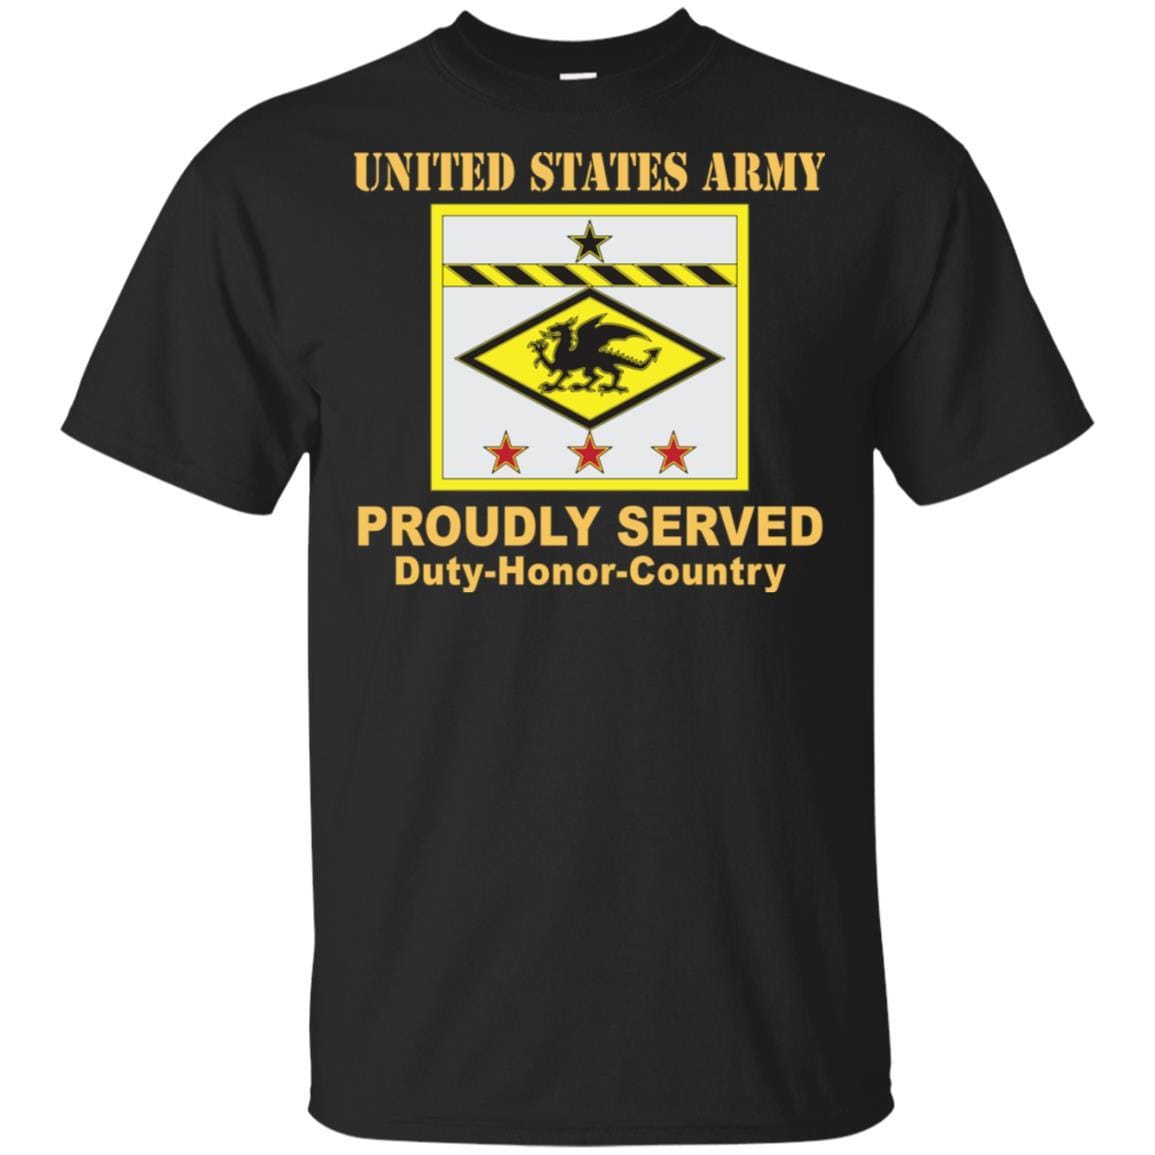 US ARMY 13TH FINANCIAL MANAGEMENT SUPPORT CENTER- Proudly Served T-Shirt On Front For Men-TShirt-Army-Veterans Nation